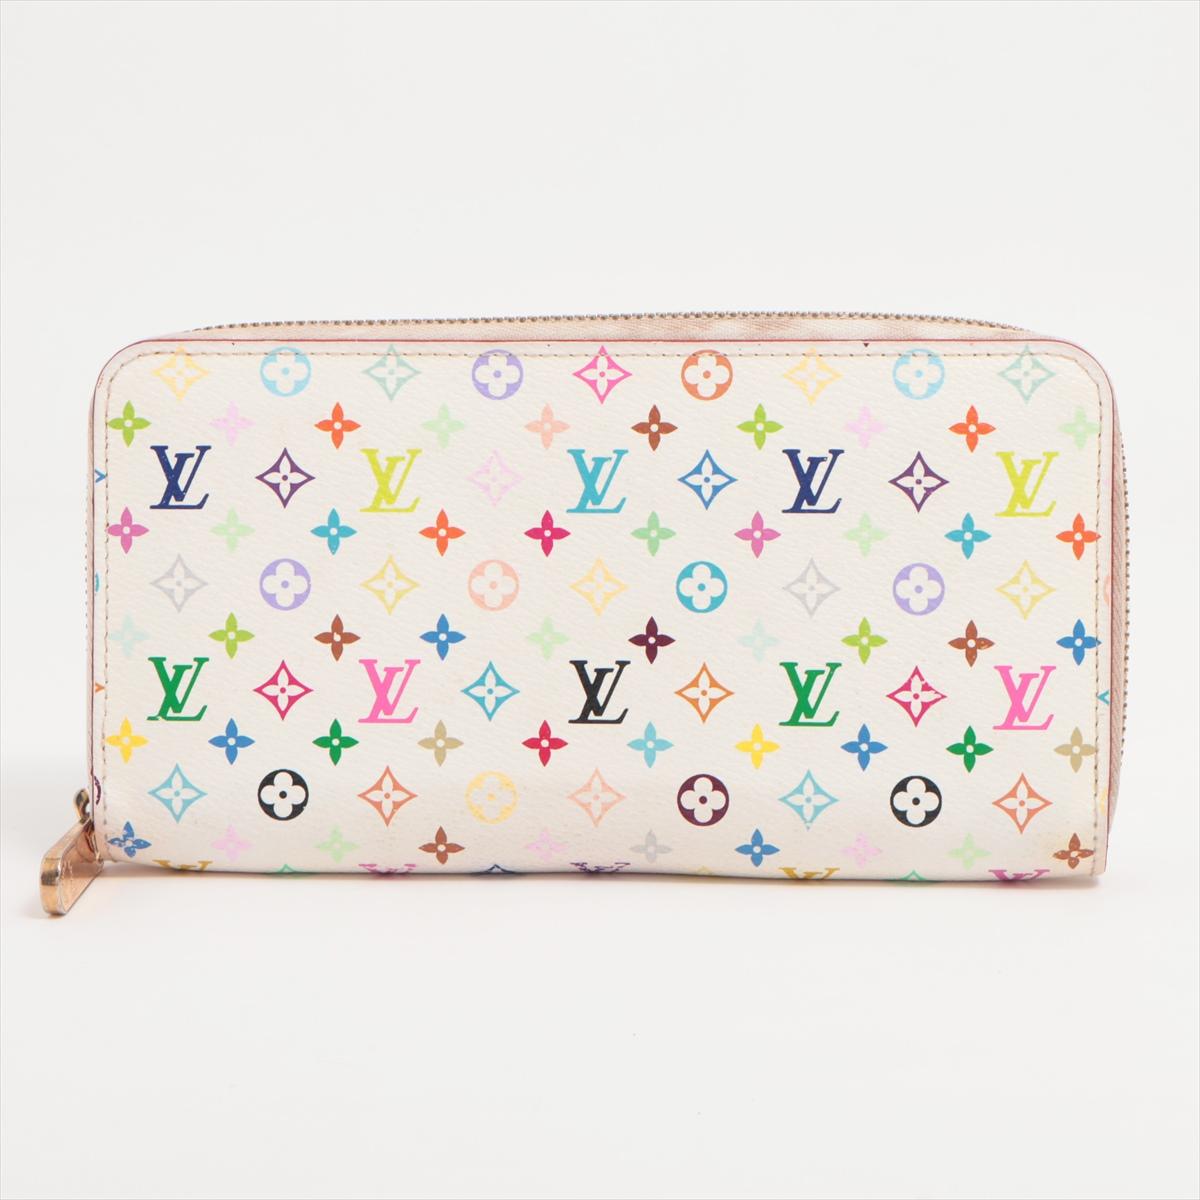 The Louis Vuitton Multicolor Zippy Wallet a vibrant and iconic accessory that seamlessly blends luxury with a playful aesthetic. The wallet features signature Multicolor monogram canvas designed by Takashi Murakami, showcasing a lively and colorful